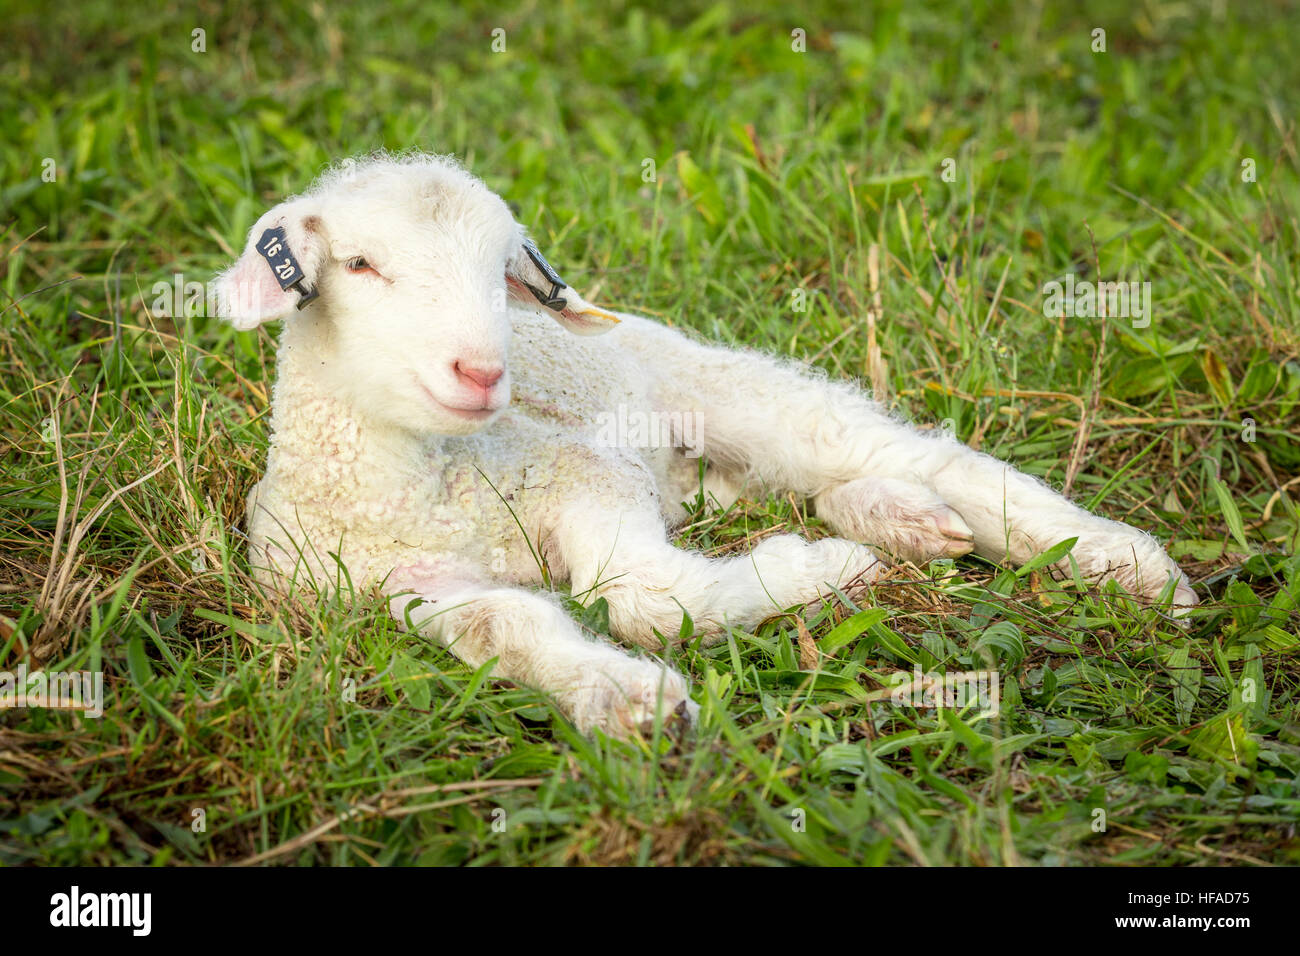 baby lamb lying in the grass Stock Photo